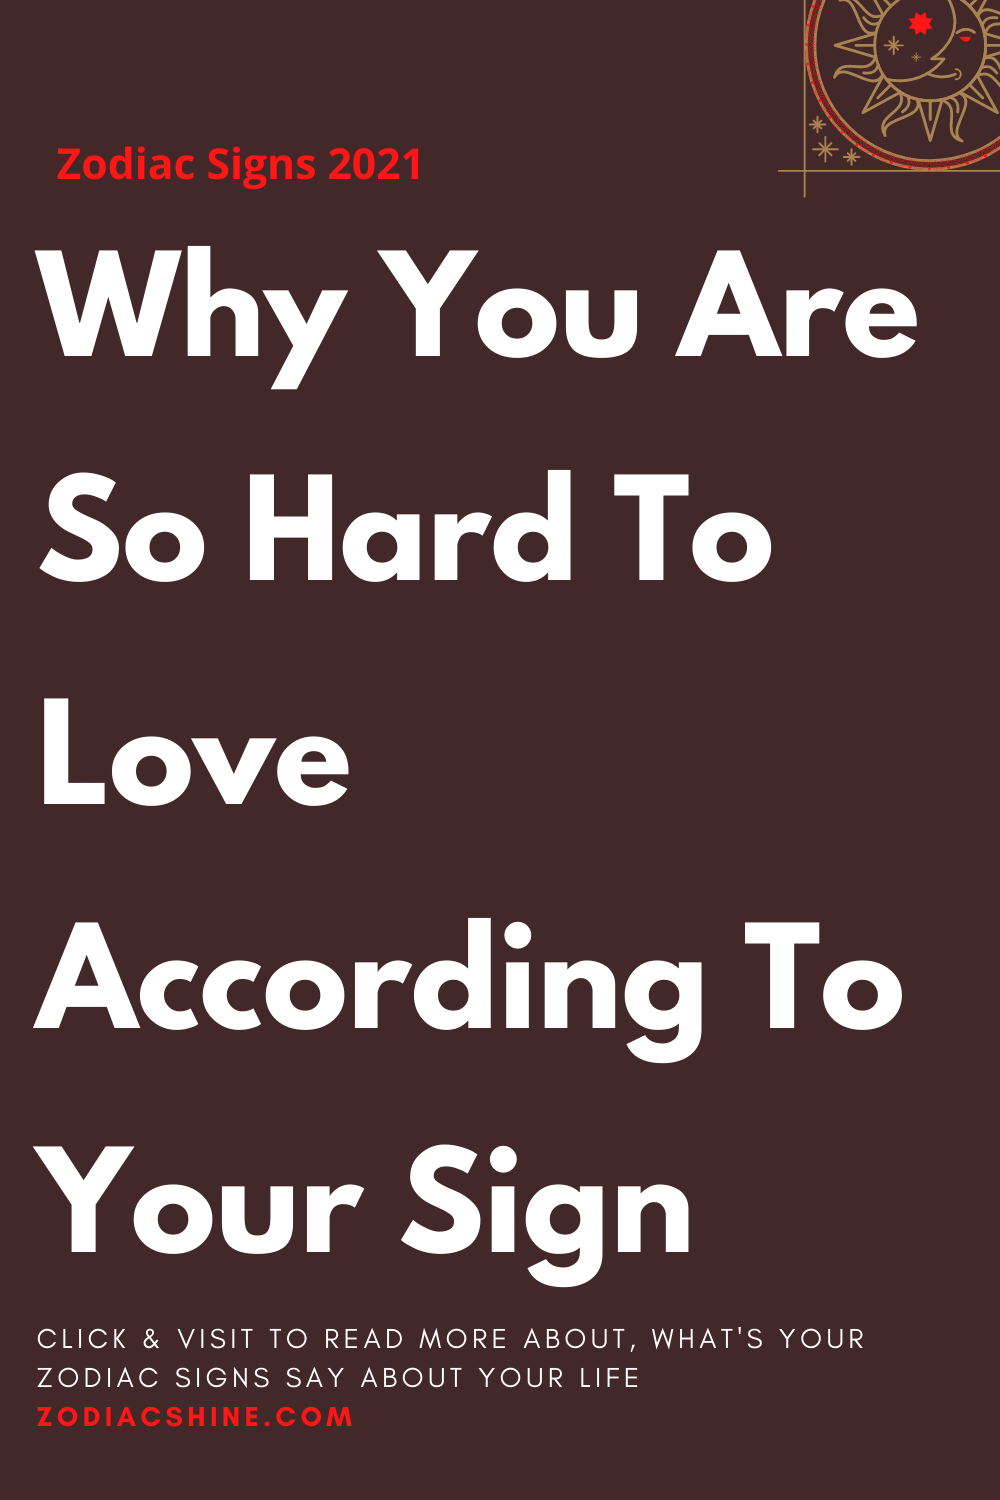 Why You Are So Hard To Love According To Your Sign